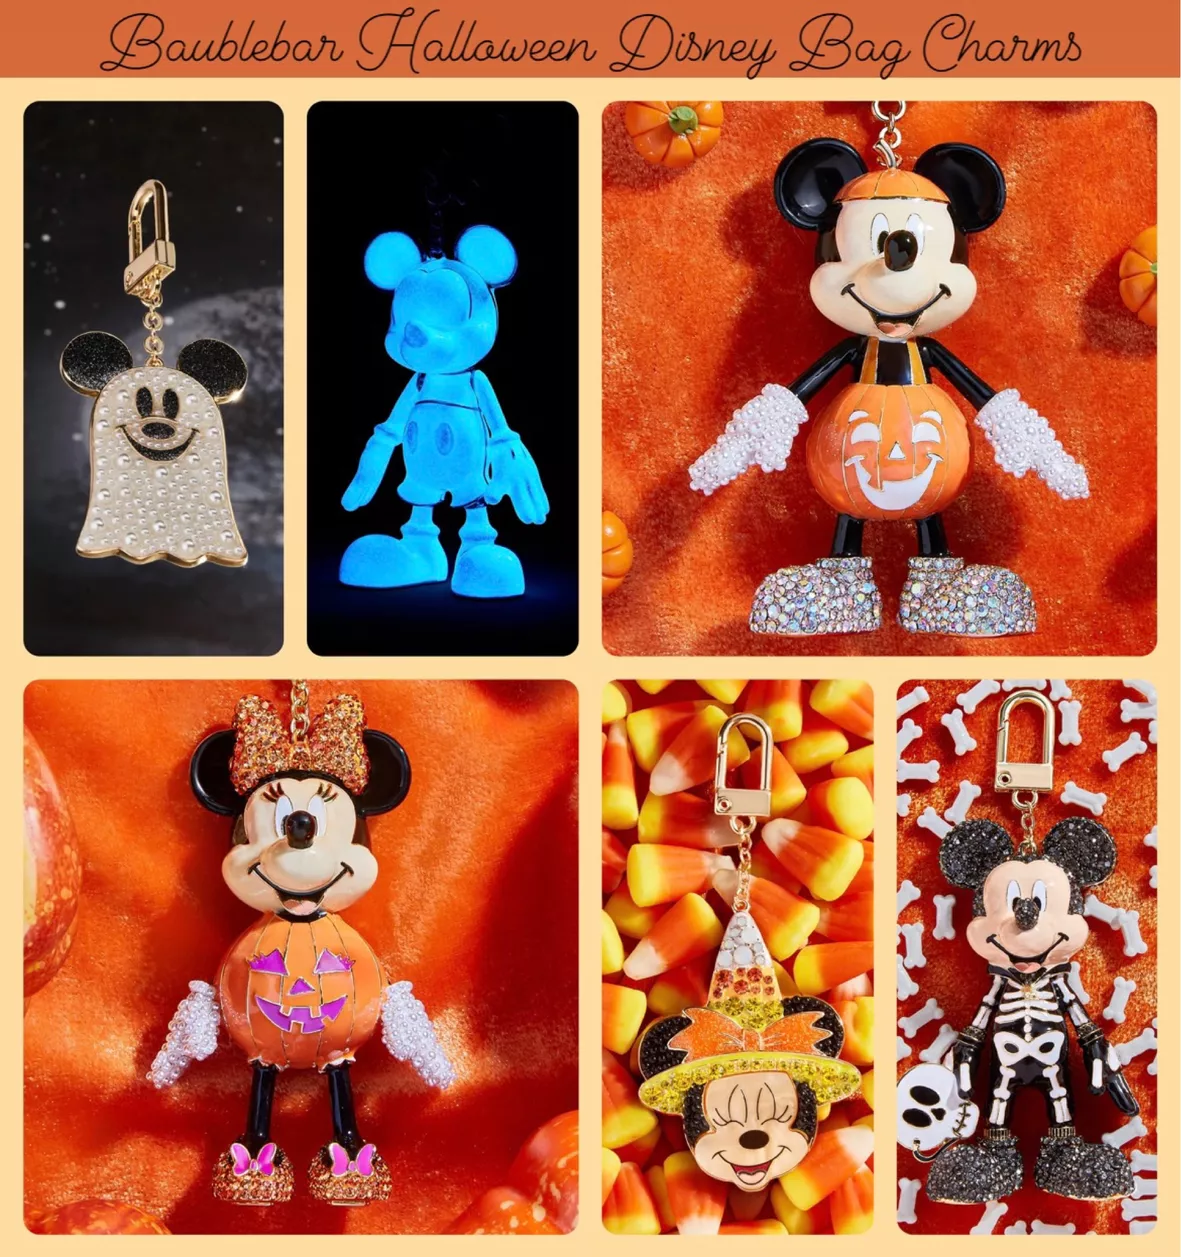 BaubleBar releases new Disney Halloween jewelry collection